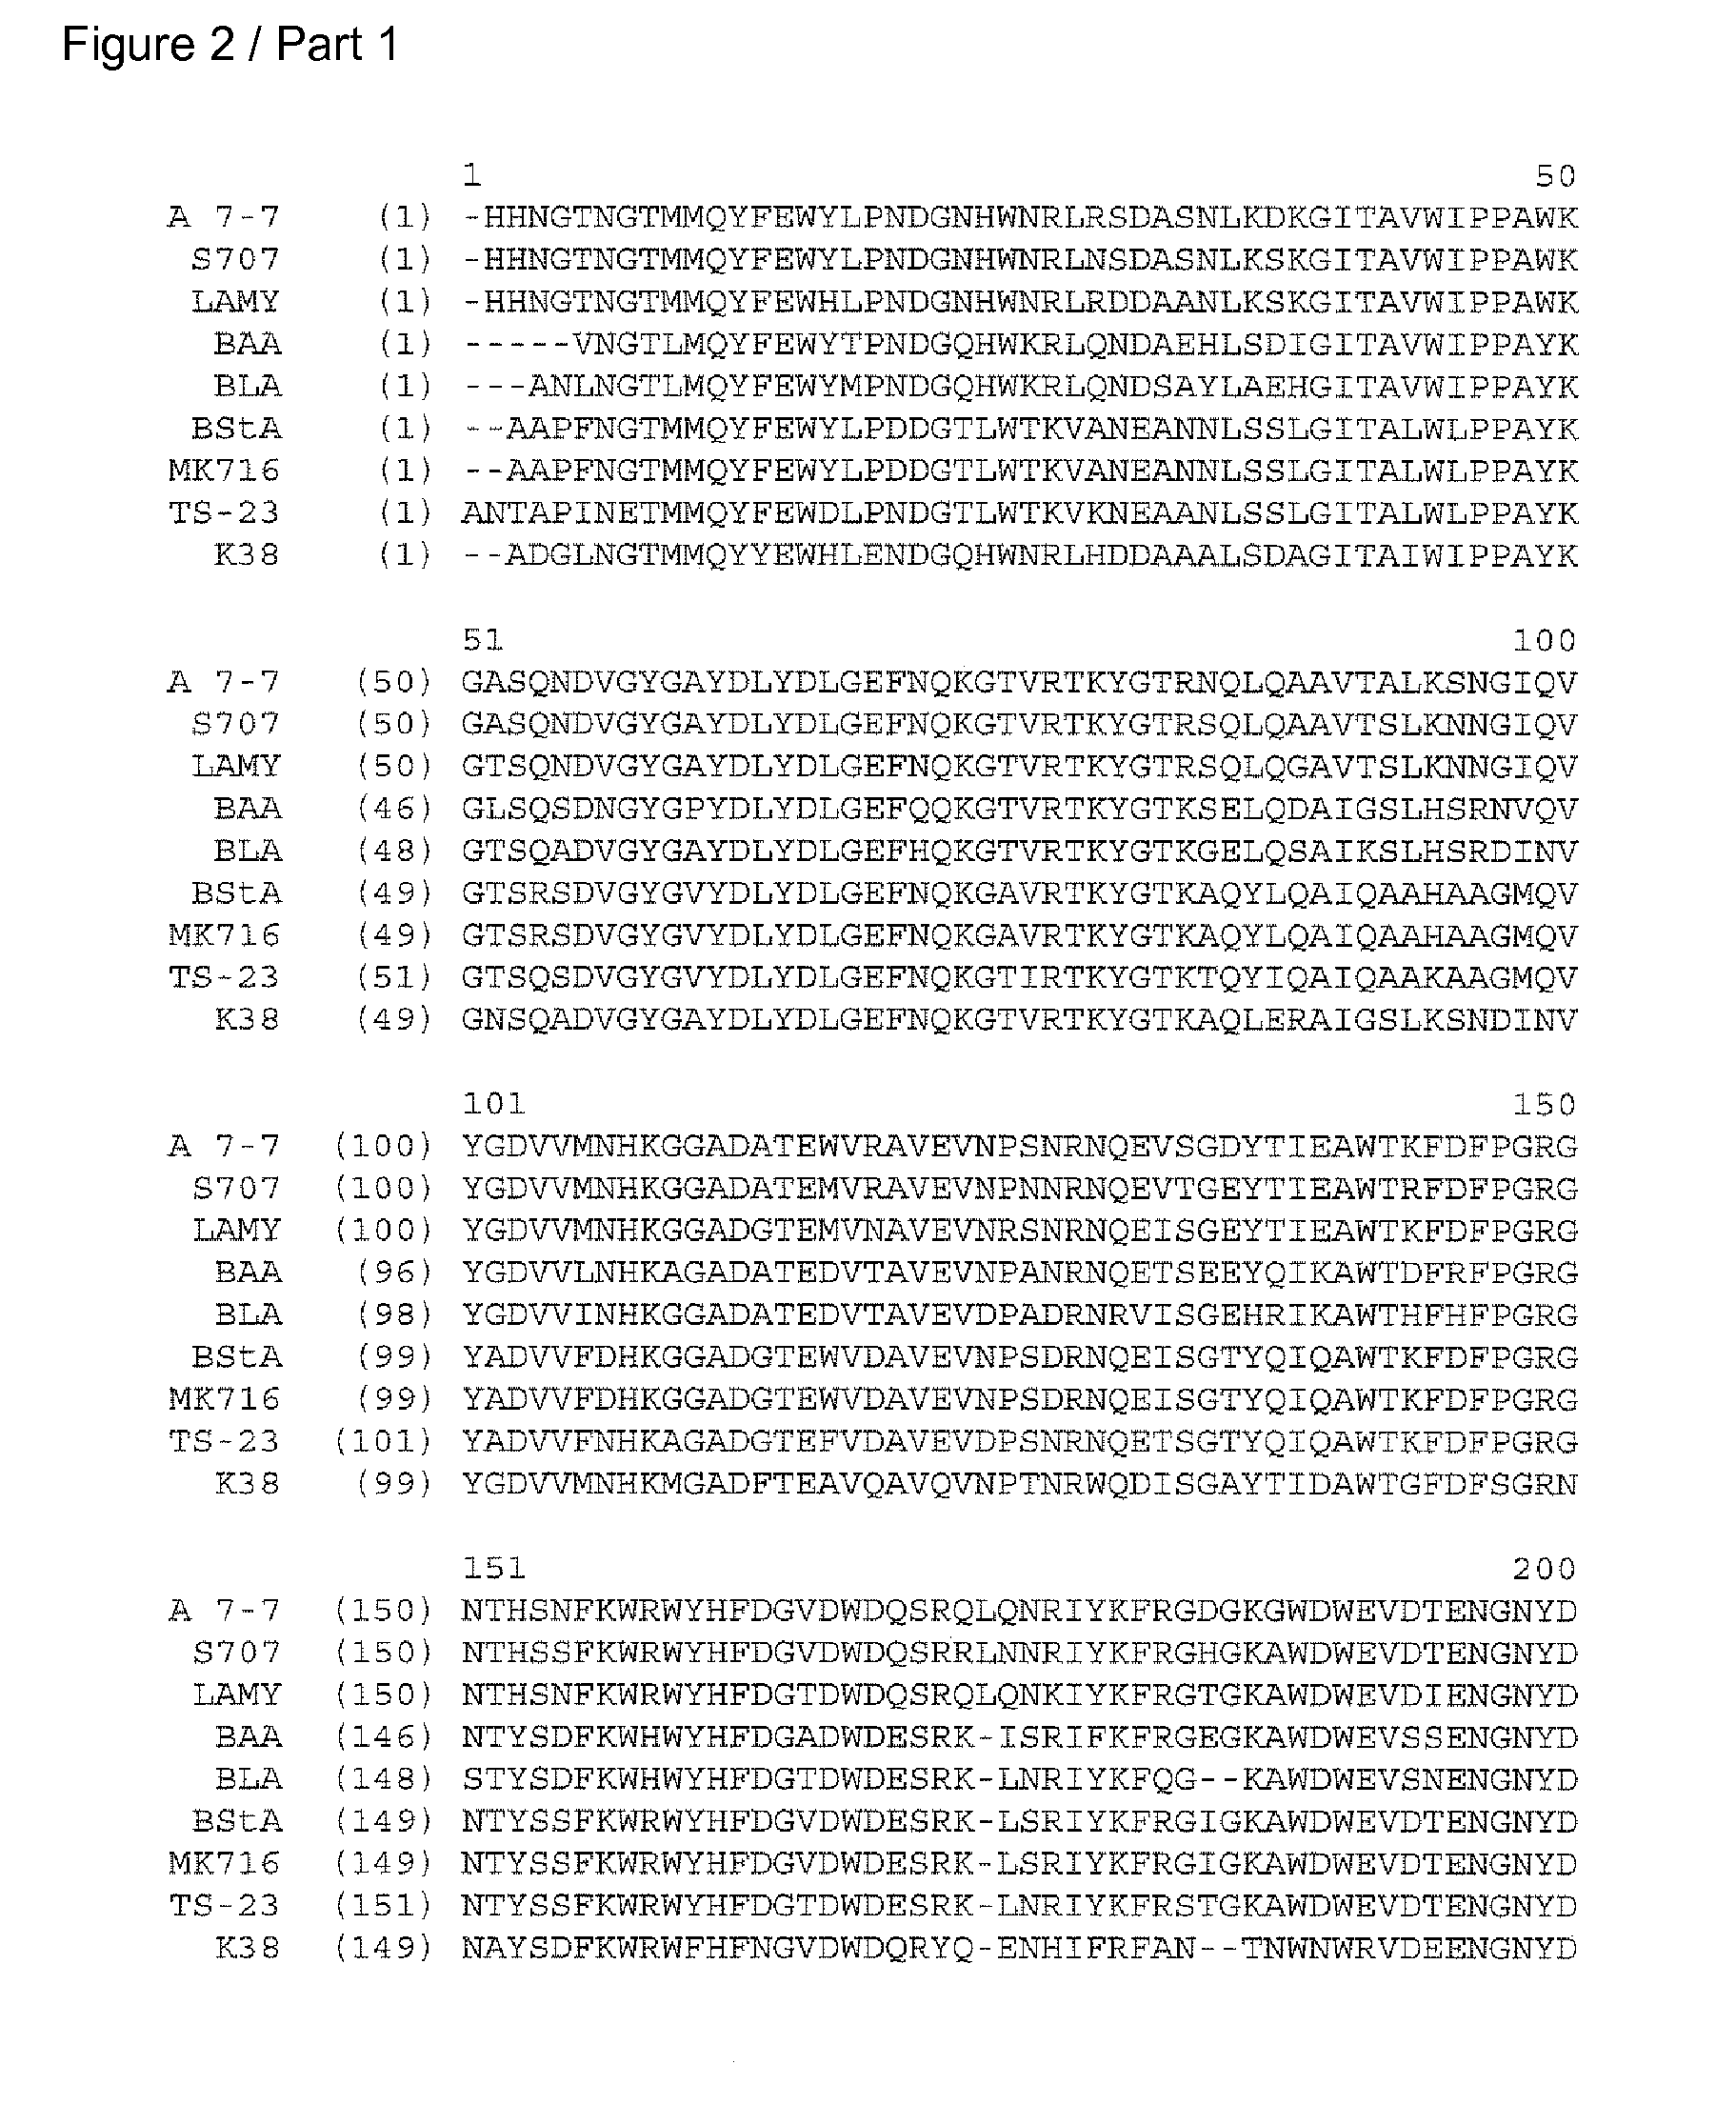 Alpha-amylase variants stabilized against dimerization and/or multimerization, method for the production thereof, and detergents and cleansers containing these alpha-amylase variants